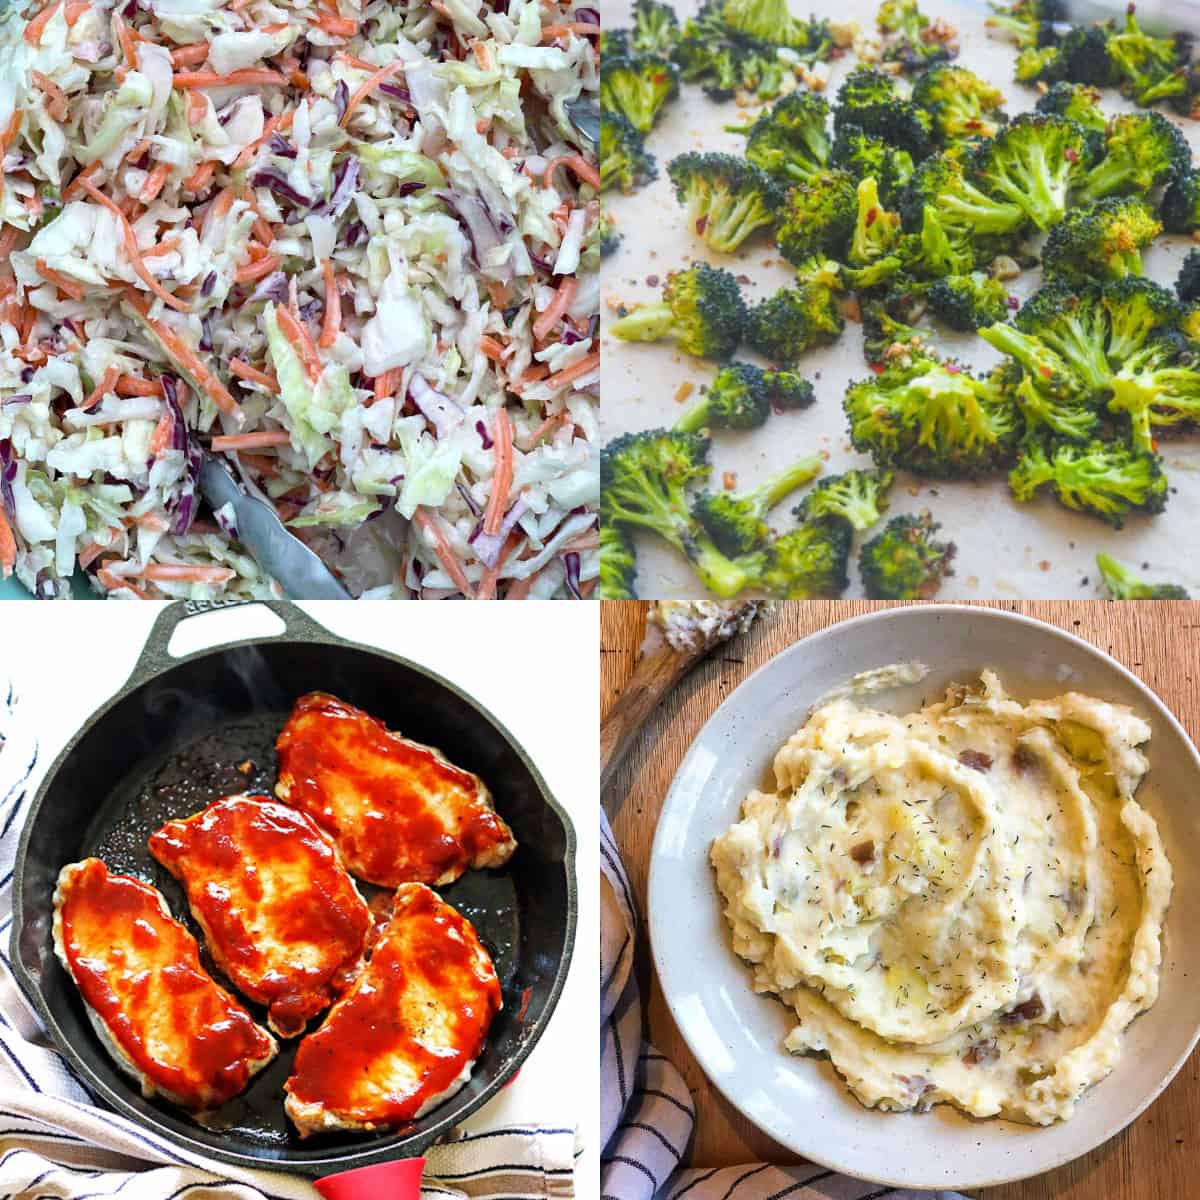 A collage of images showing what to serve with pork chops - coleslaw, potatoes, and broccoli.